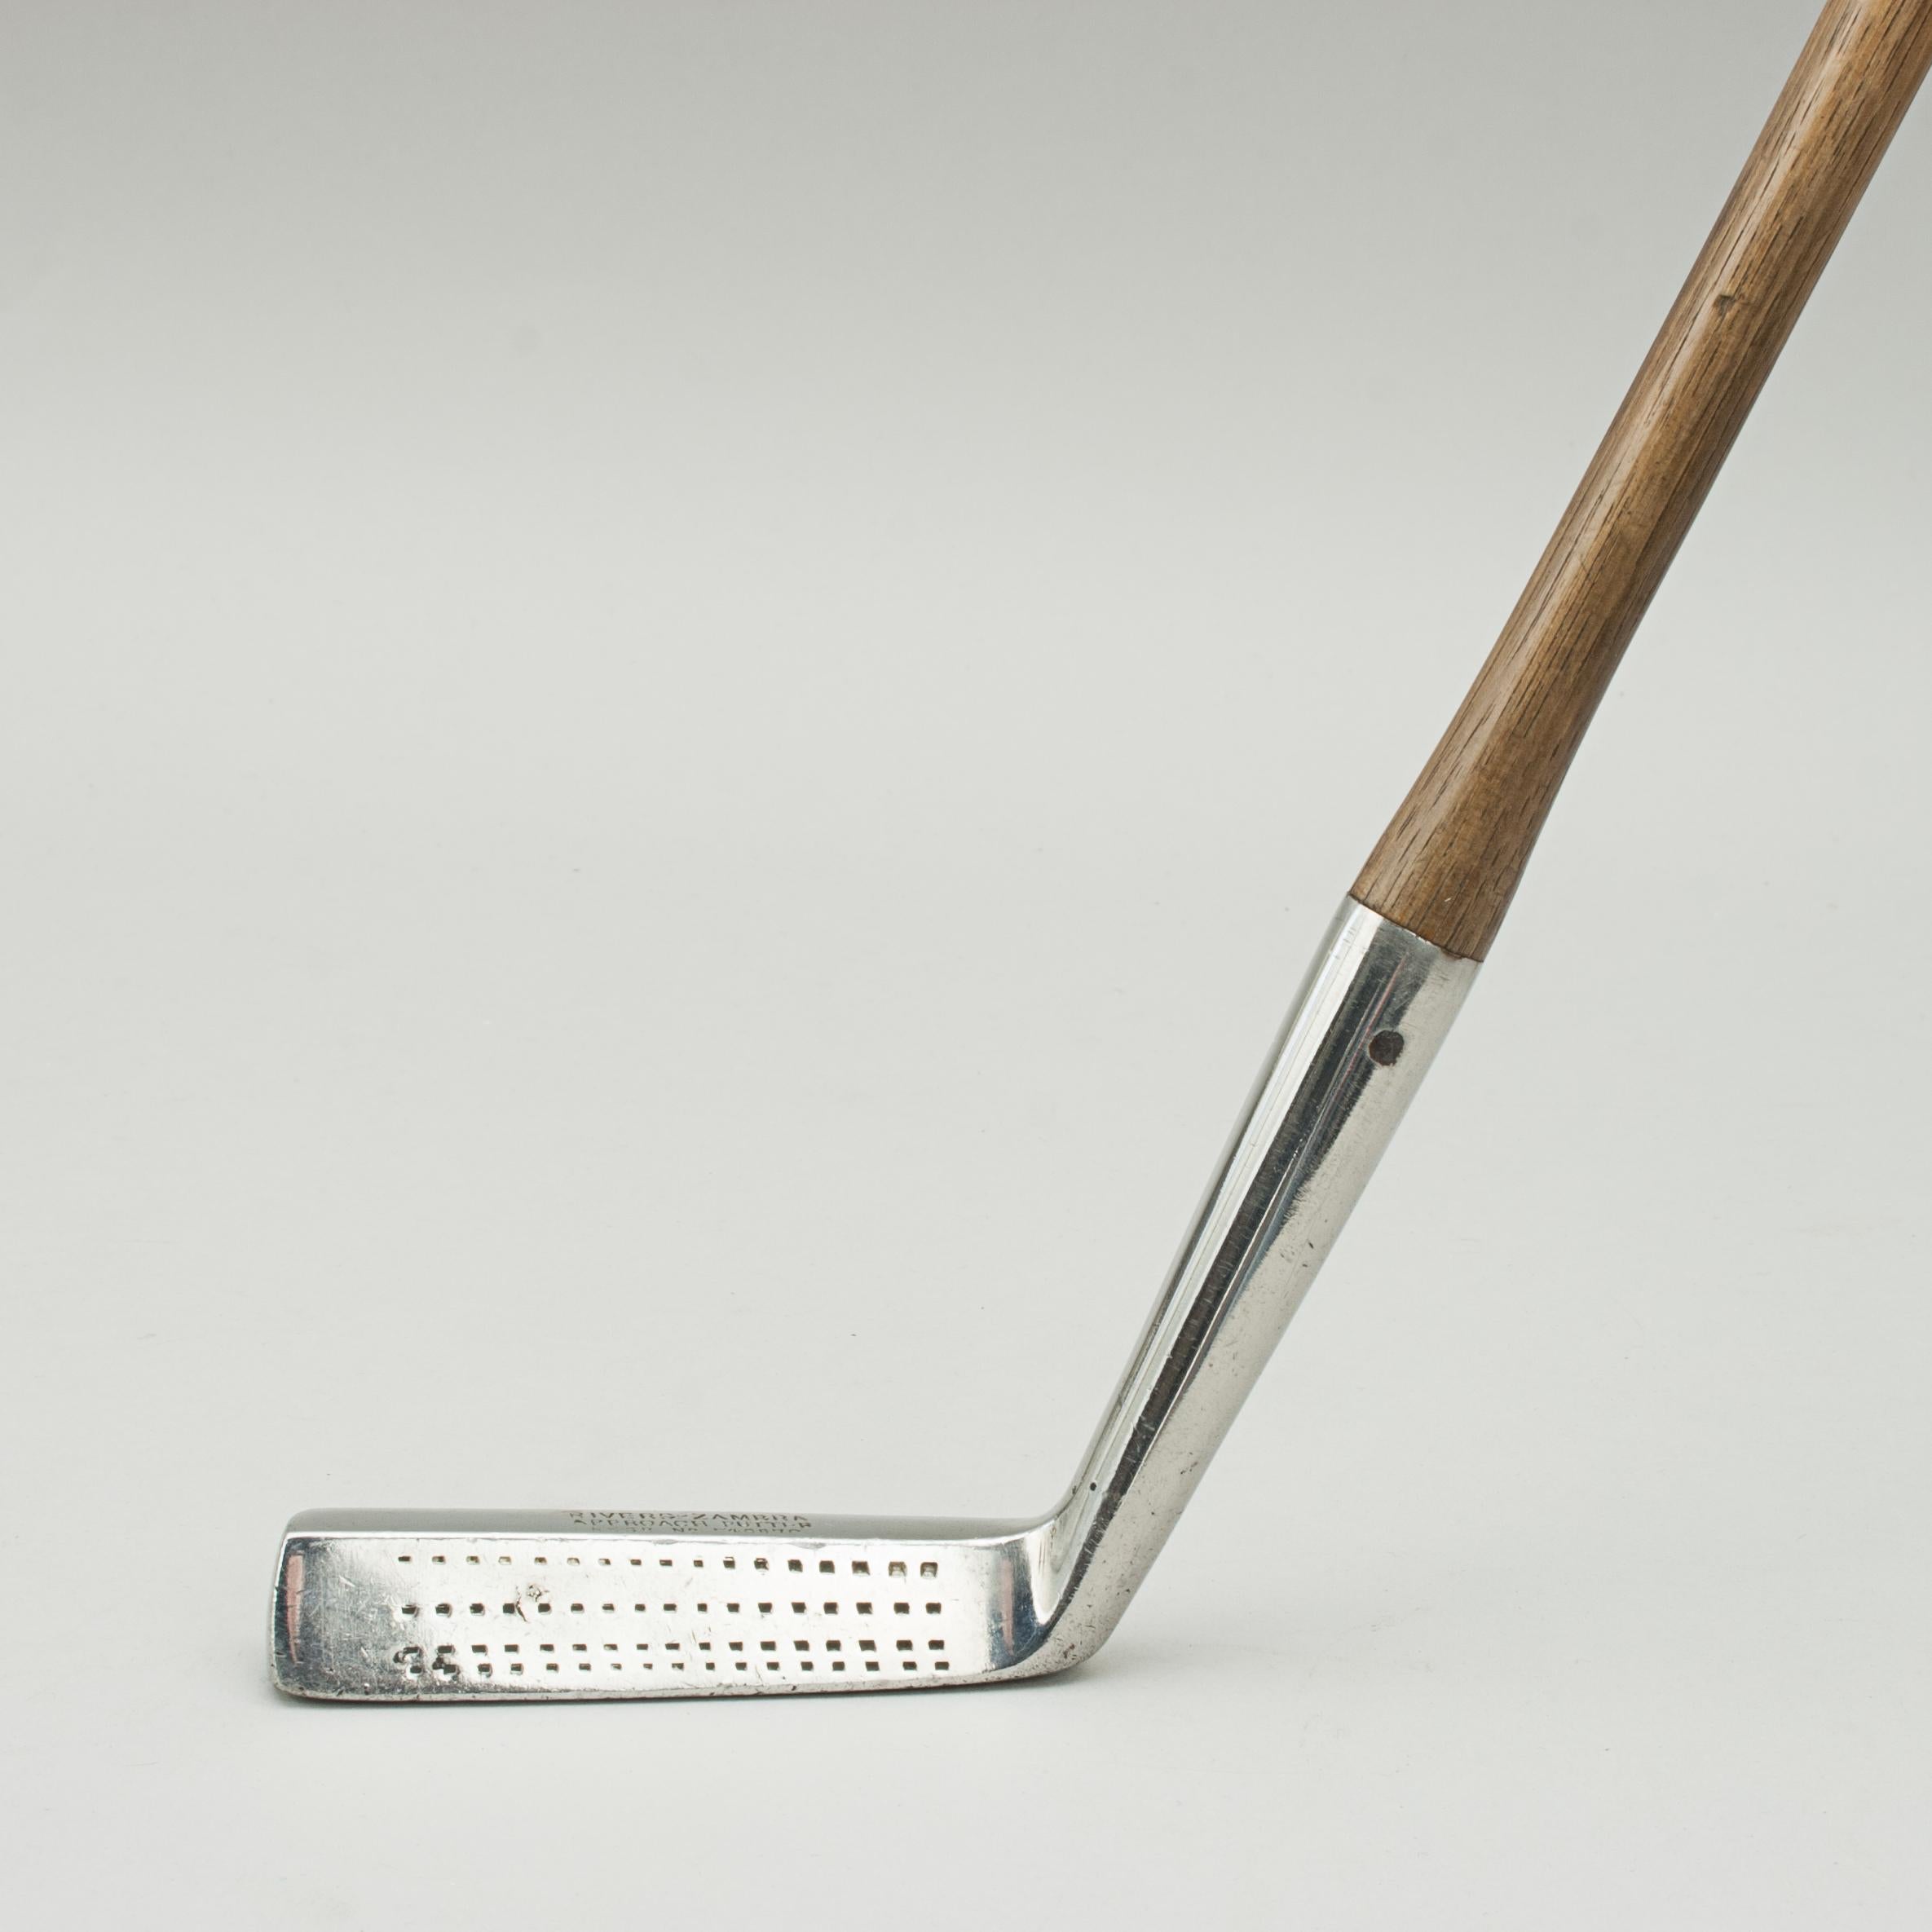 Hickory Shafted Golf Club, Rivers-Zambra Approach Putter.
A good original example of 'The Scuffler' by the Stadium Golf Co. This is an unusual chipper with a unique head shape having a low profile blade with 25° lofted face, with the face, crown,